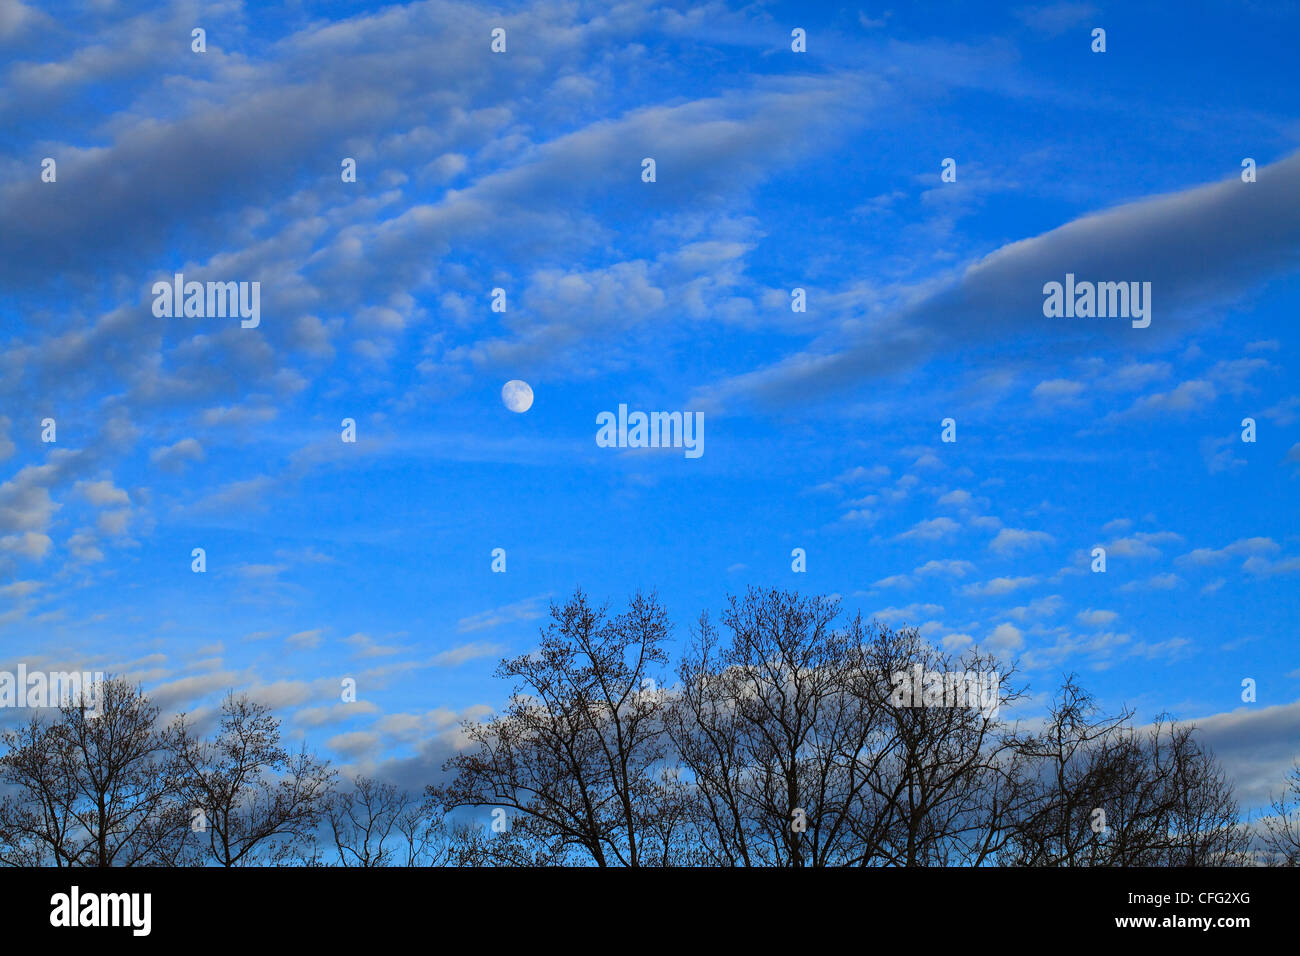 A late autumn sky with the moon rising, cirrus clouds and tree tops. Stock Photo